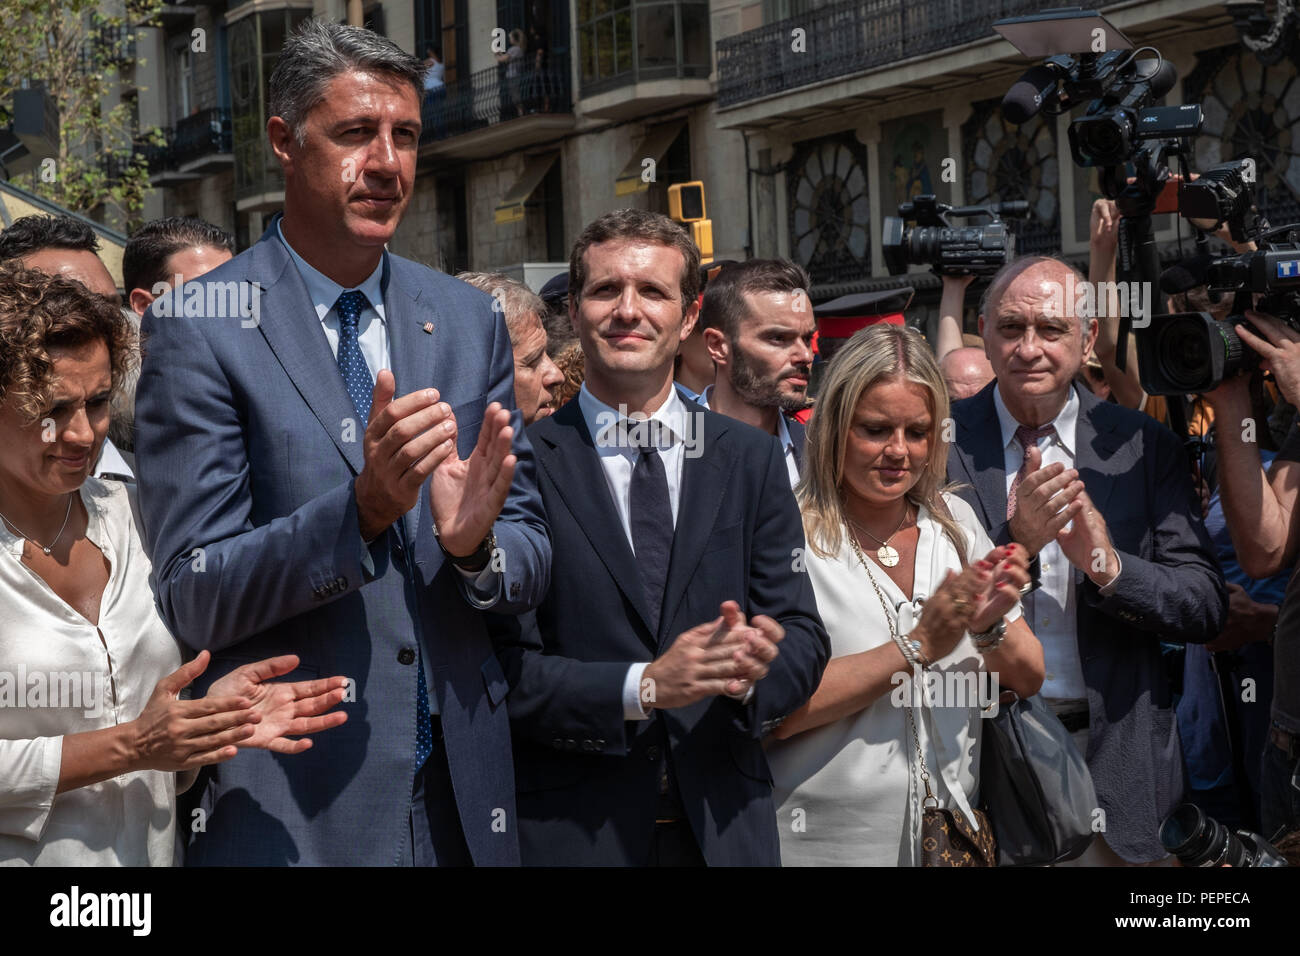 Barcelona, Catalonia, Spain. 17th Aug, 2018. The leaders of the Spanish Popular Party, Xavier Albiol and Pablo Casado, are seen at the event. Credit: Paco Freire/SOPA Images/ZUMA Wire/Alamy Live News Stock Photo